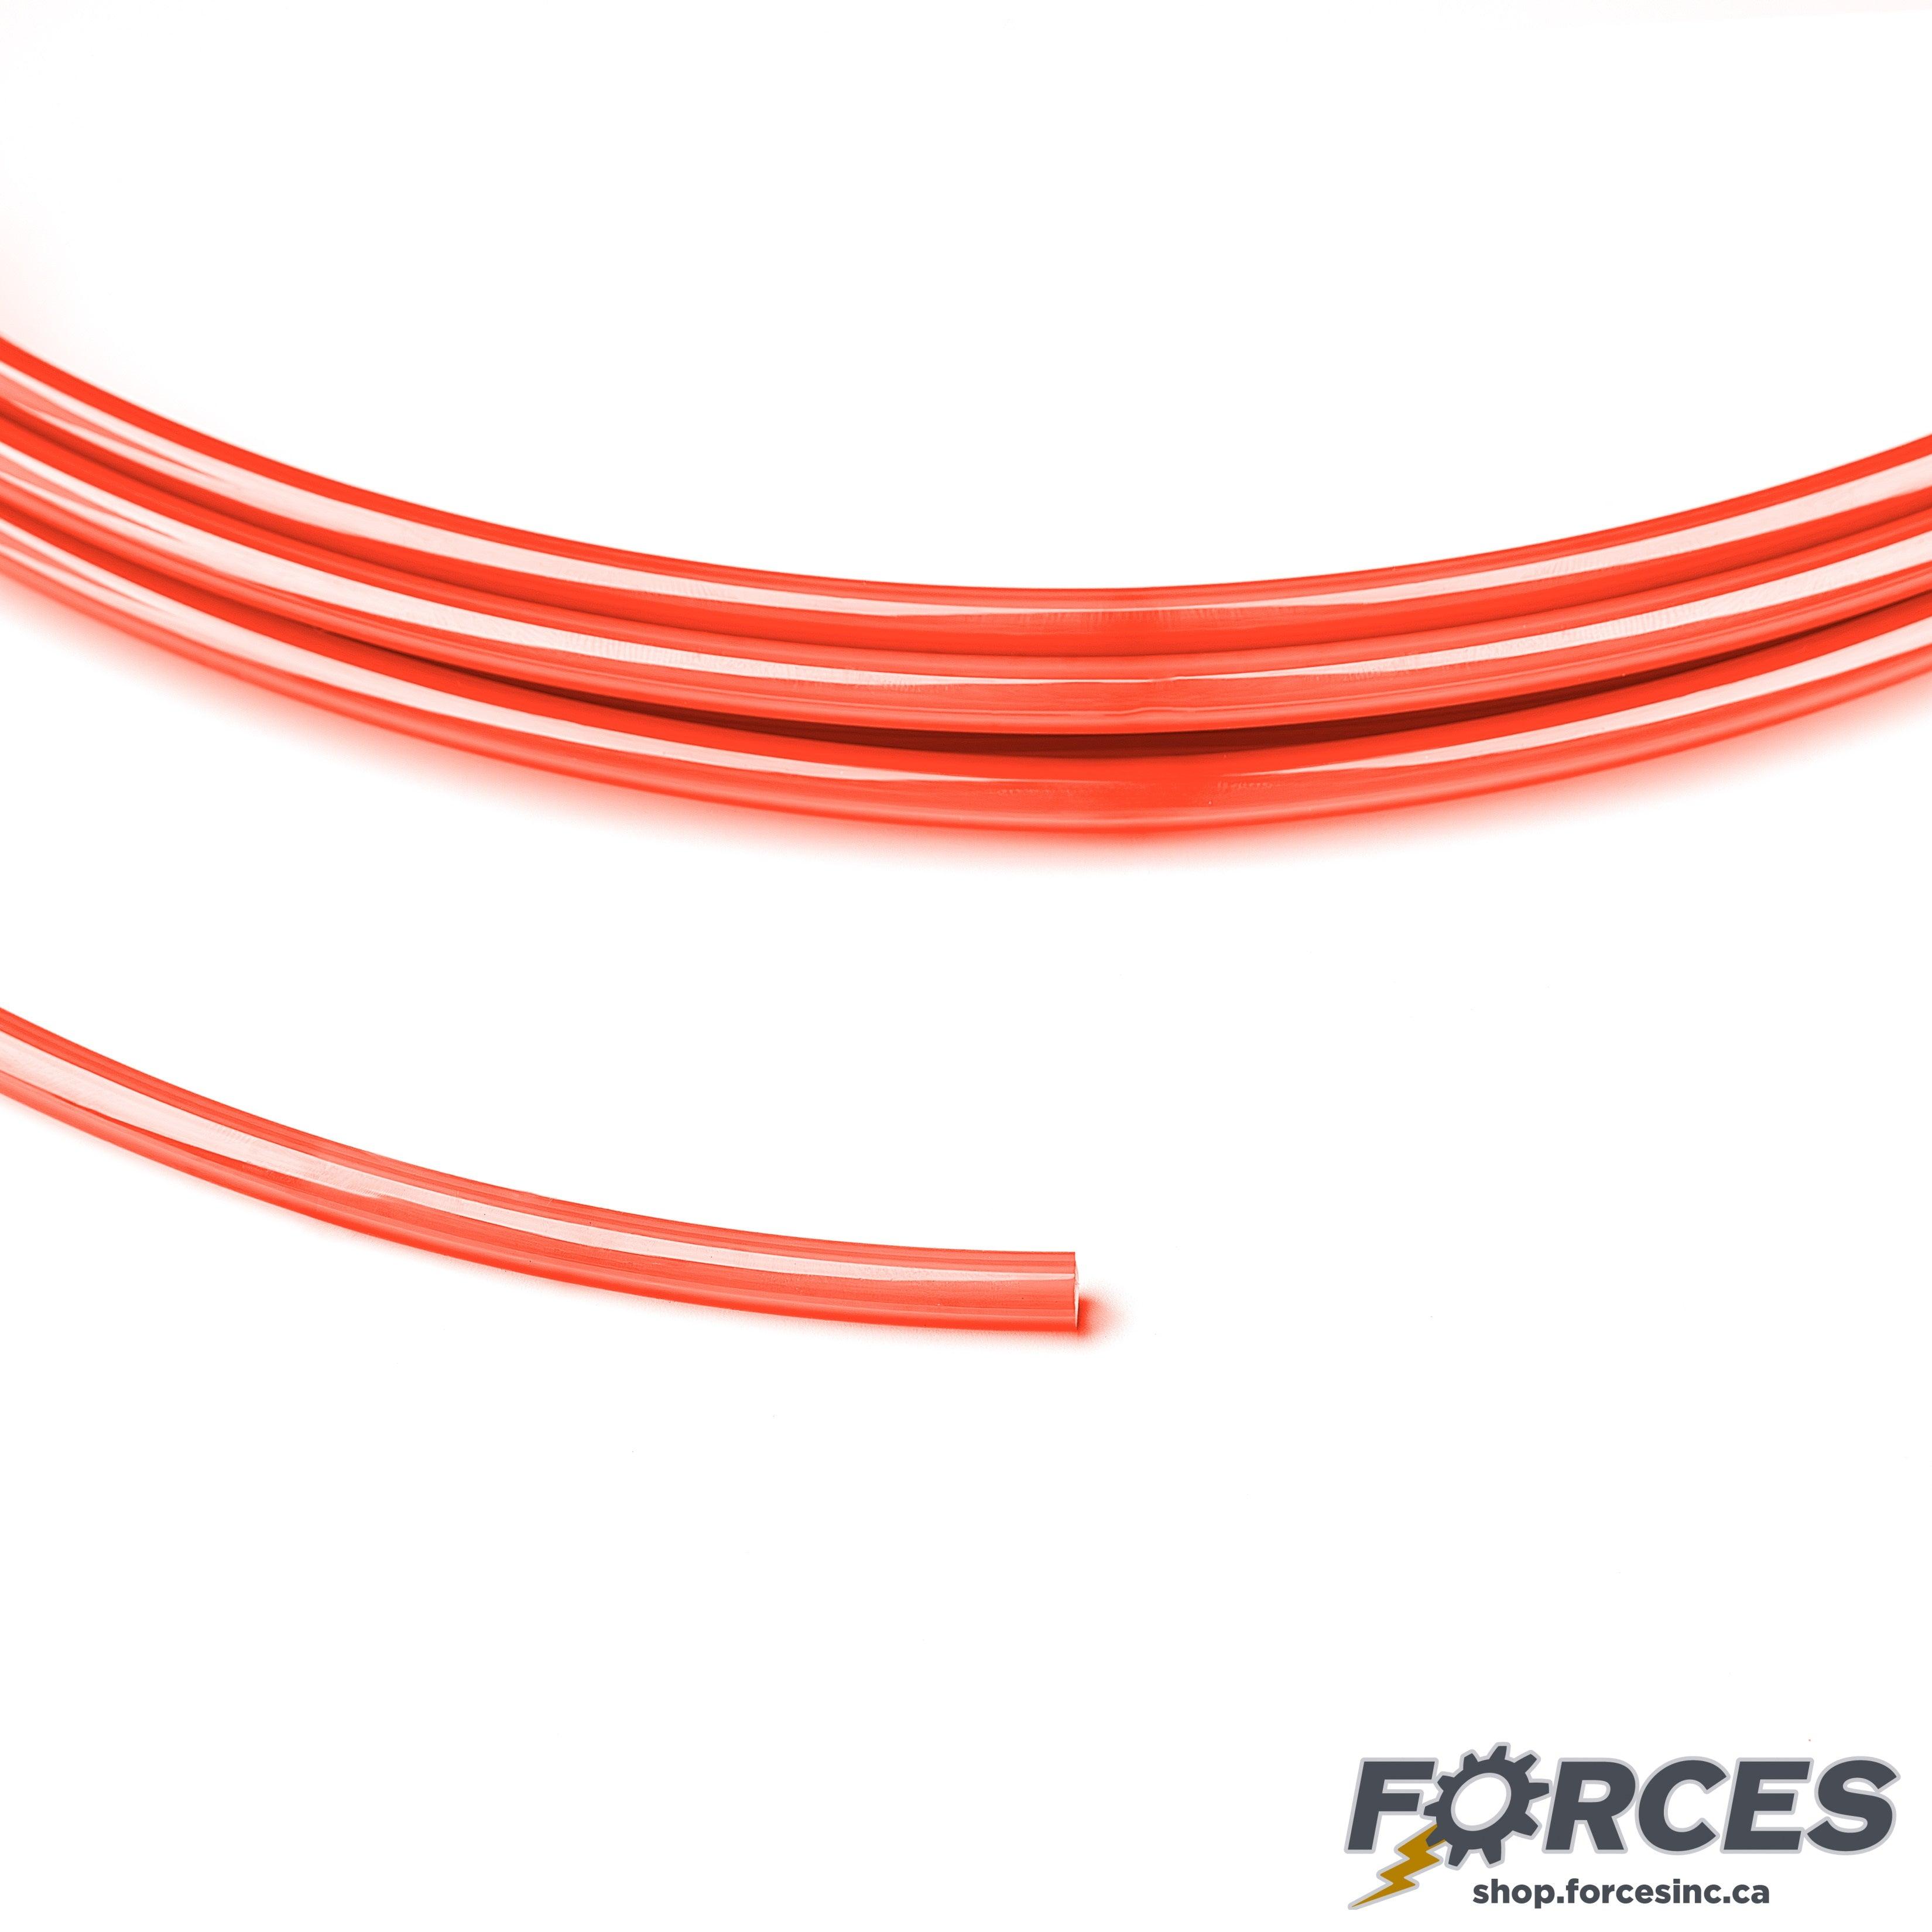 Pneumatic Air Tubing 10mm x 6.5mm Red Polyurethane - 330ft - Forces Inc